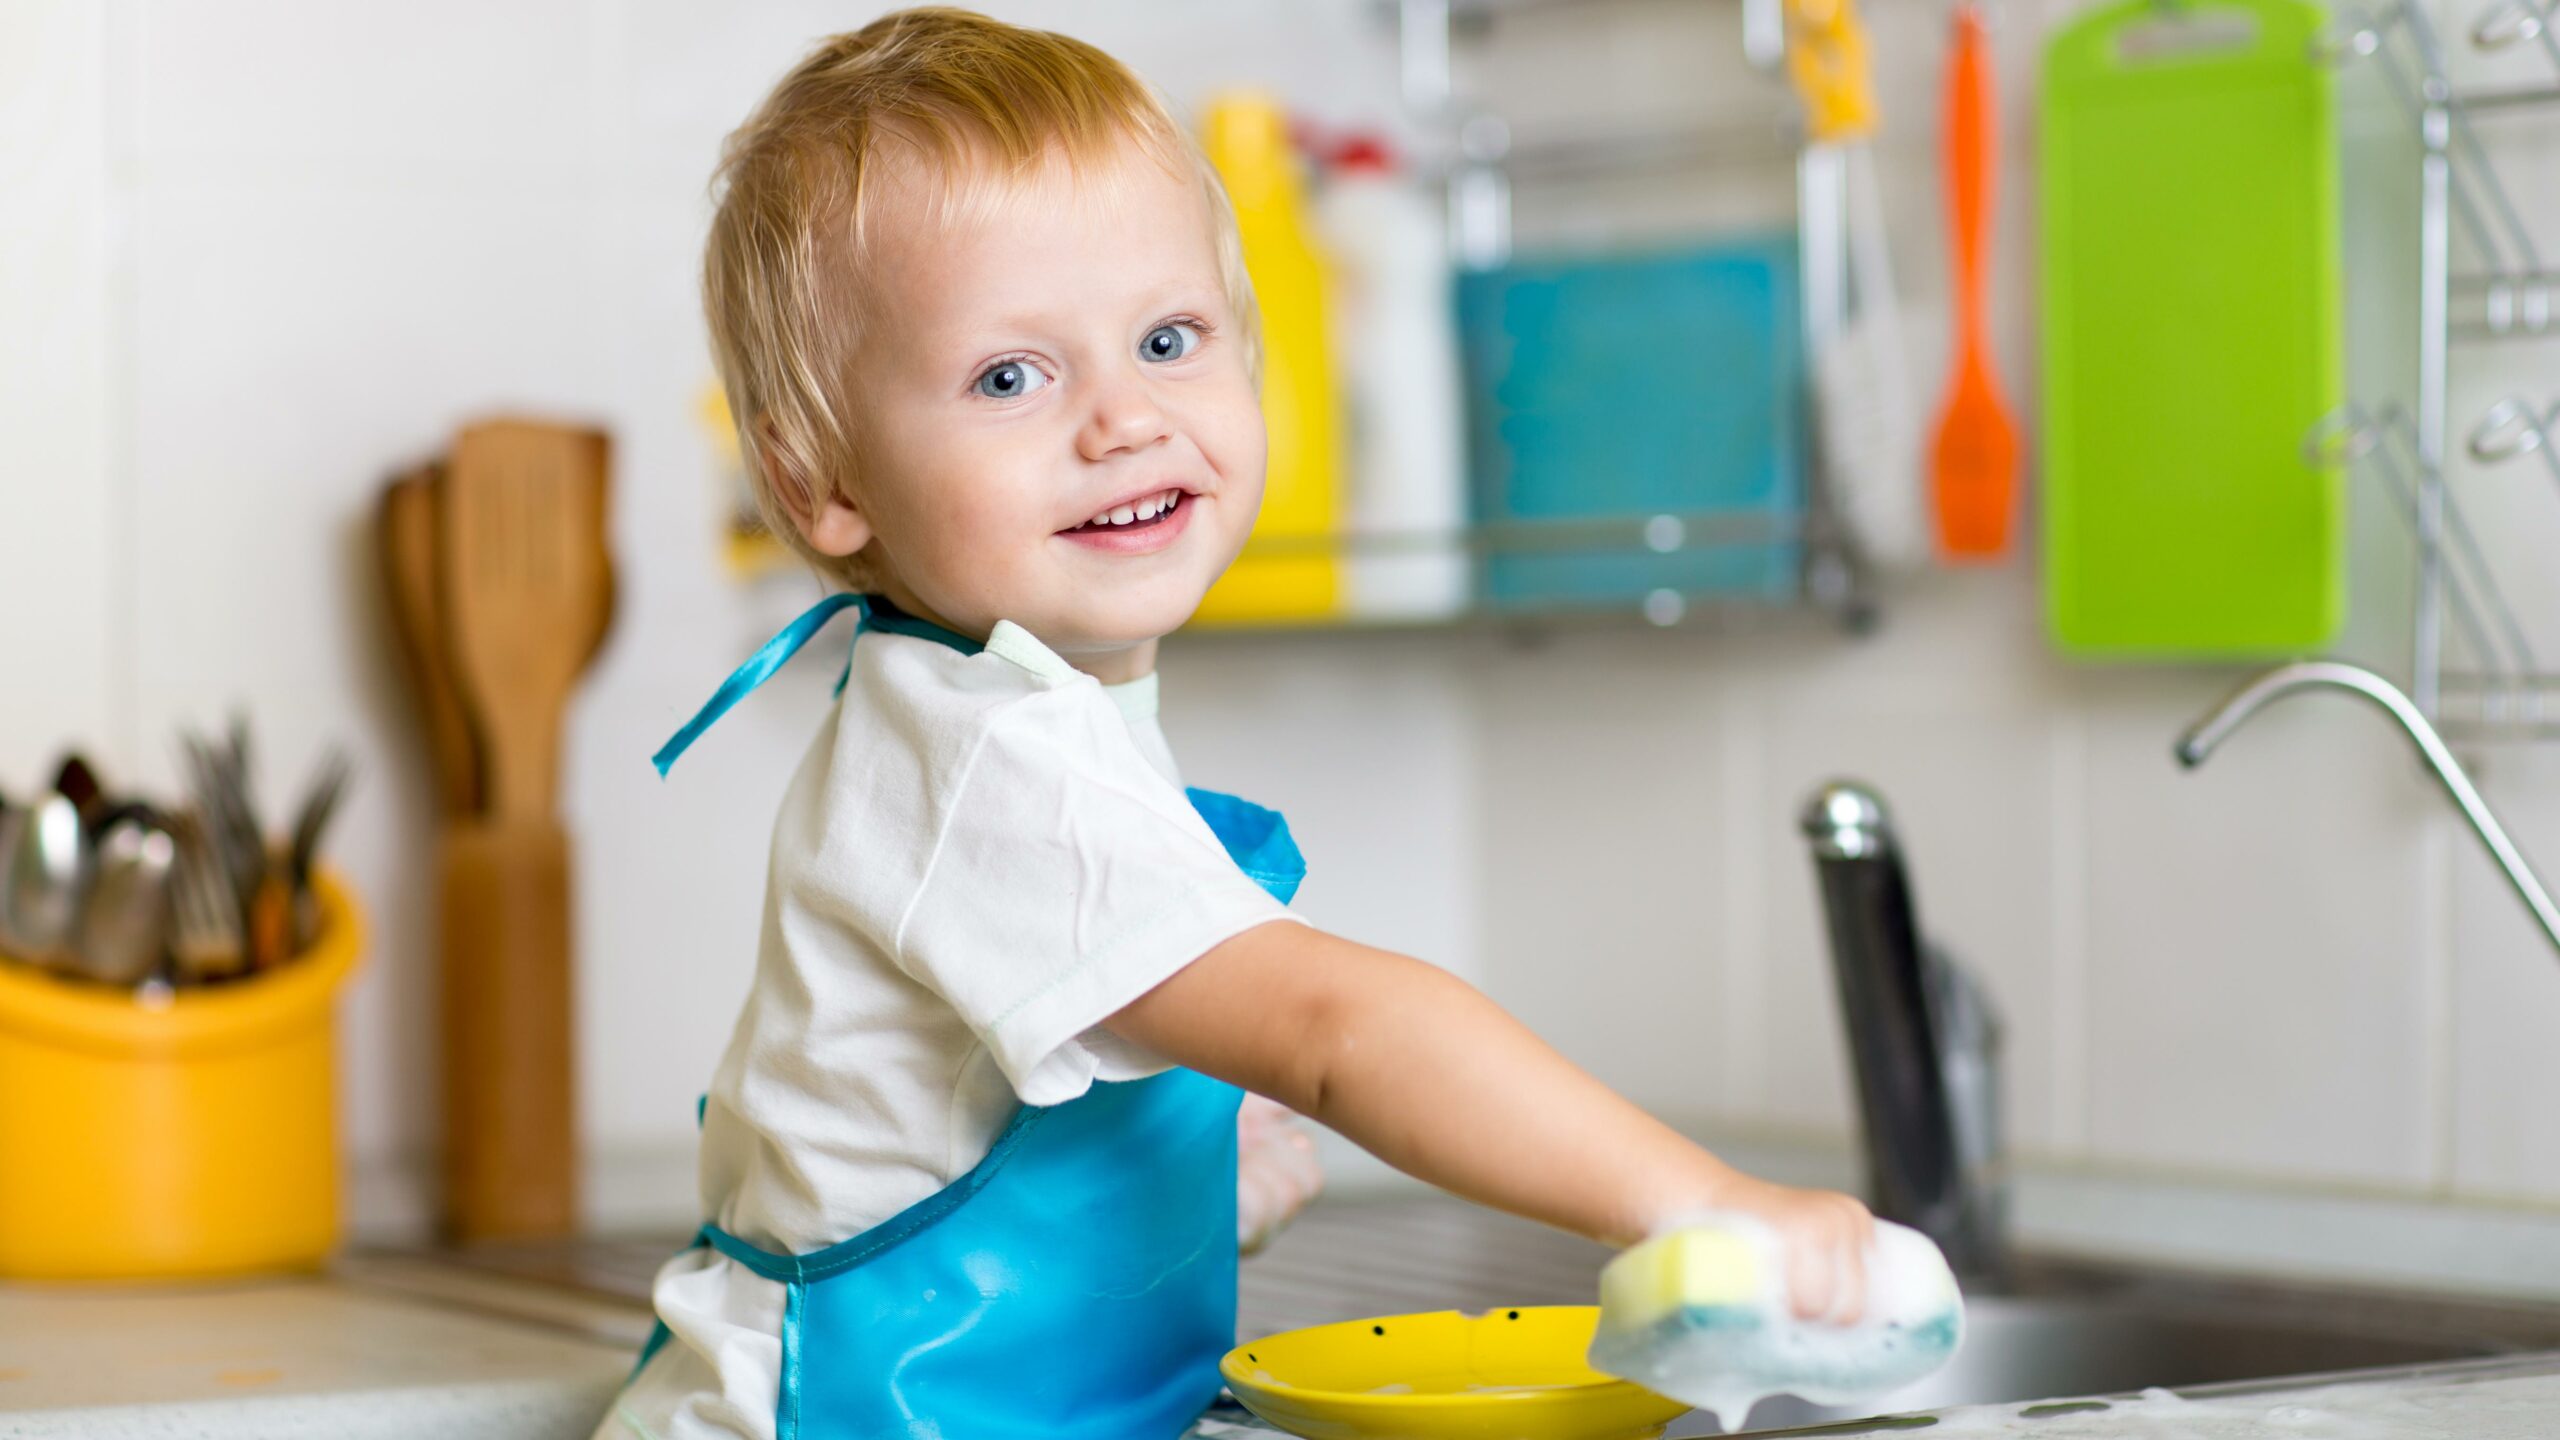 Toddler Doing Dishes